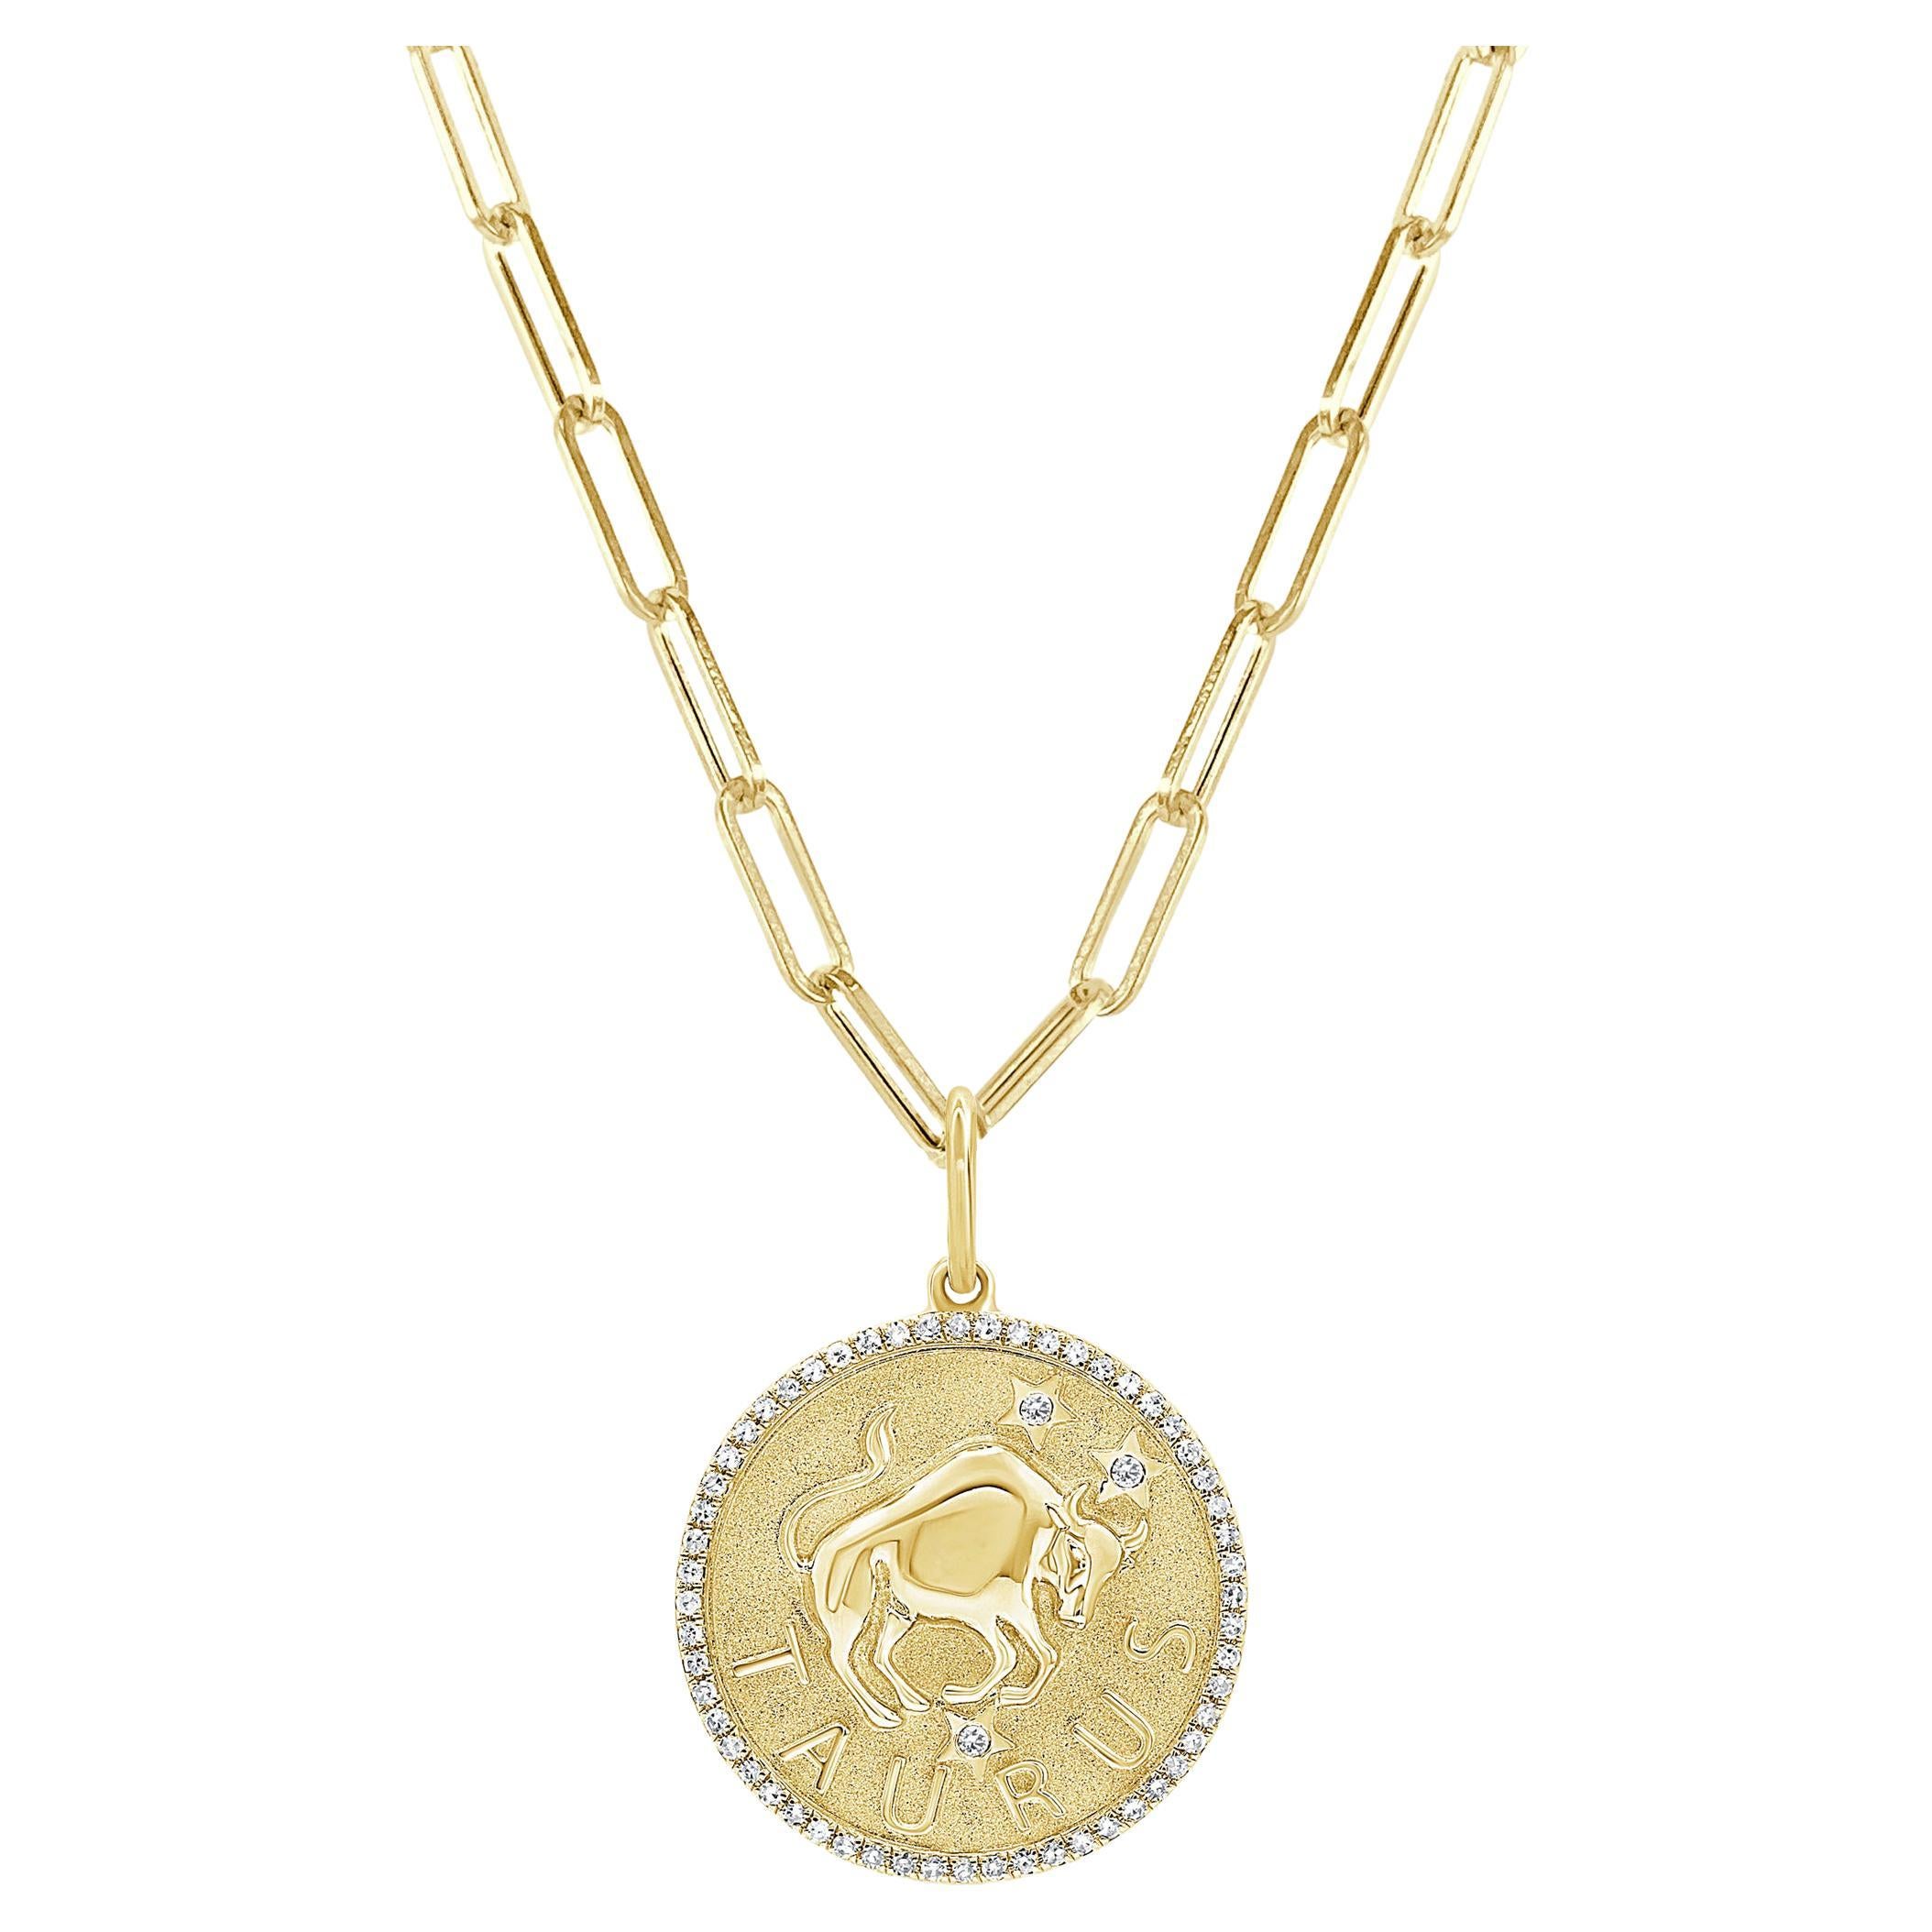 Zodiac Diamond Necklace 14K Yellow Gold 1/5 CT TDW Gifts for Her, TAURUS